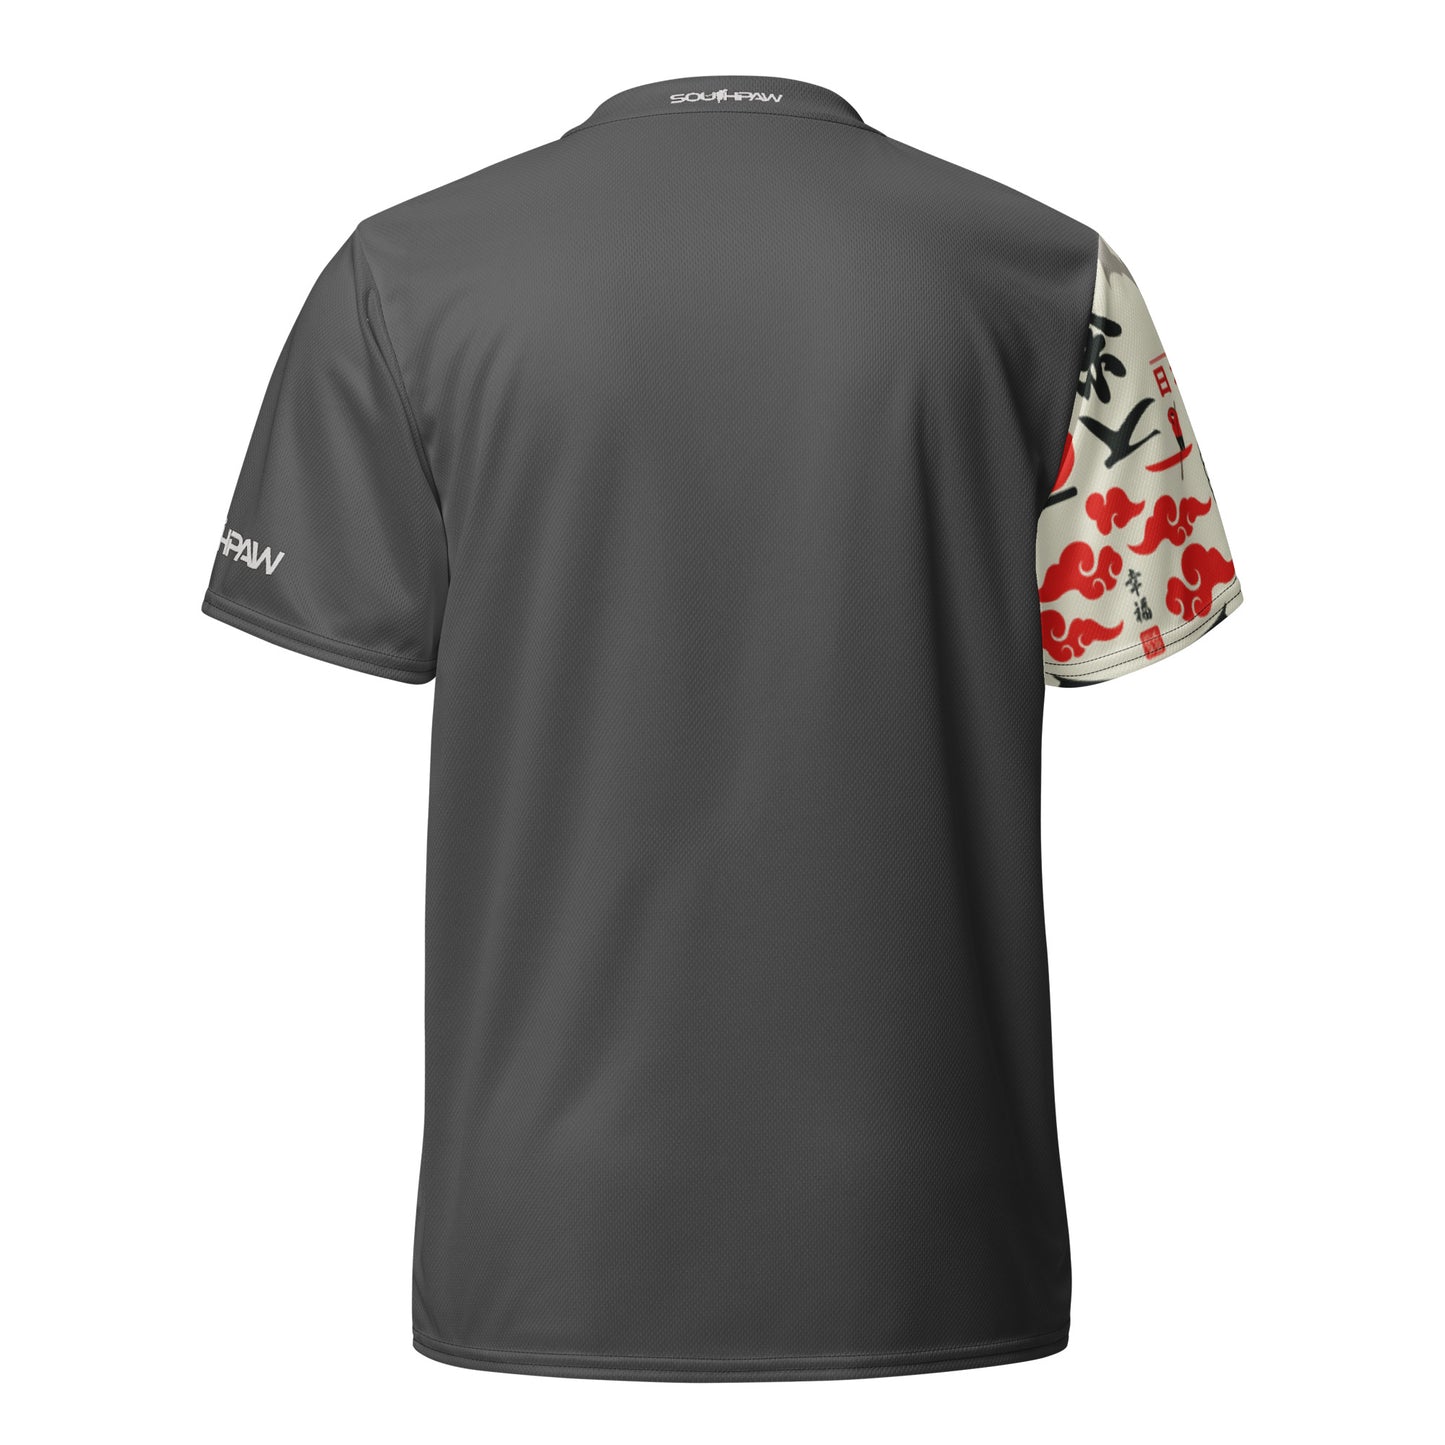 SouthPaw Bowling Jersey - the Post